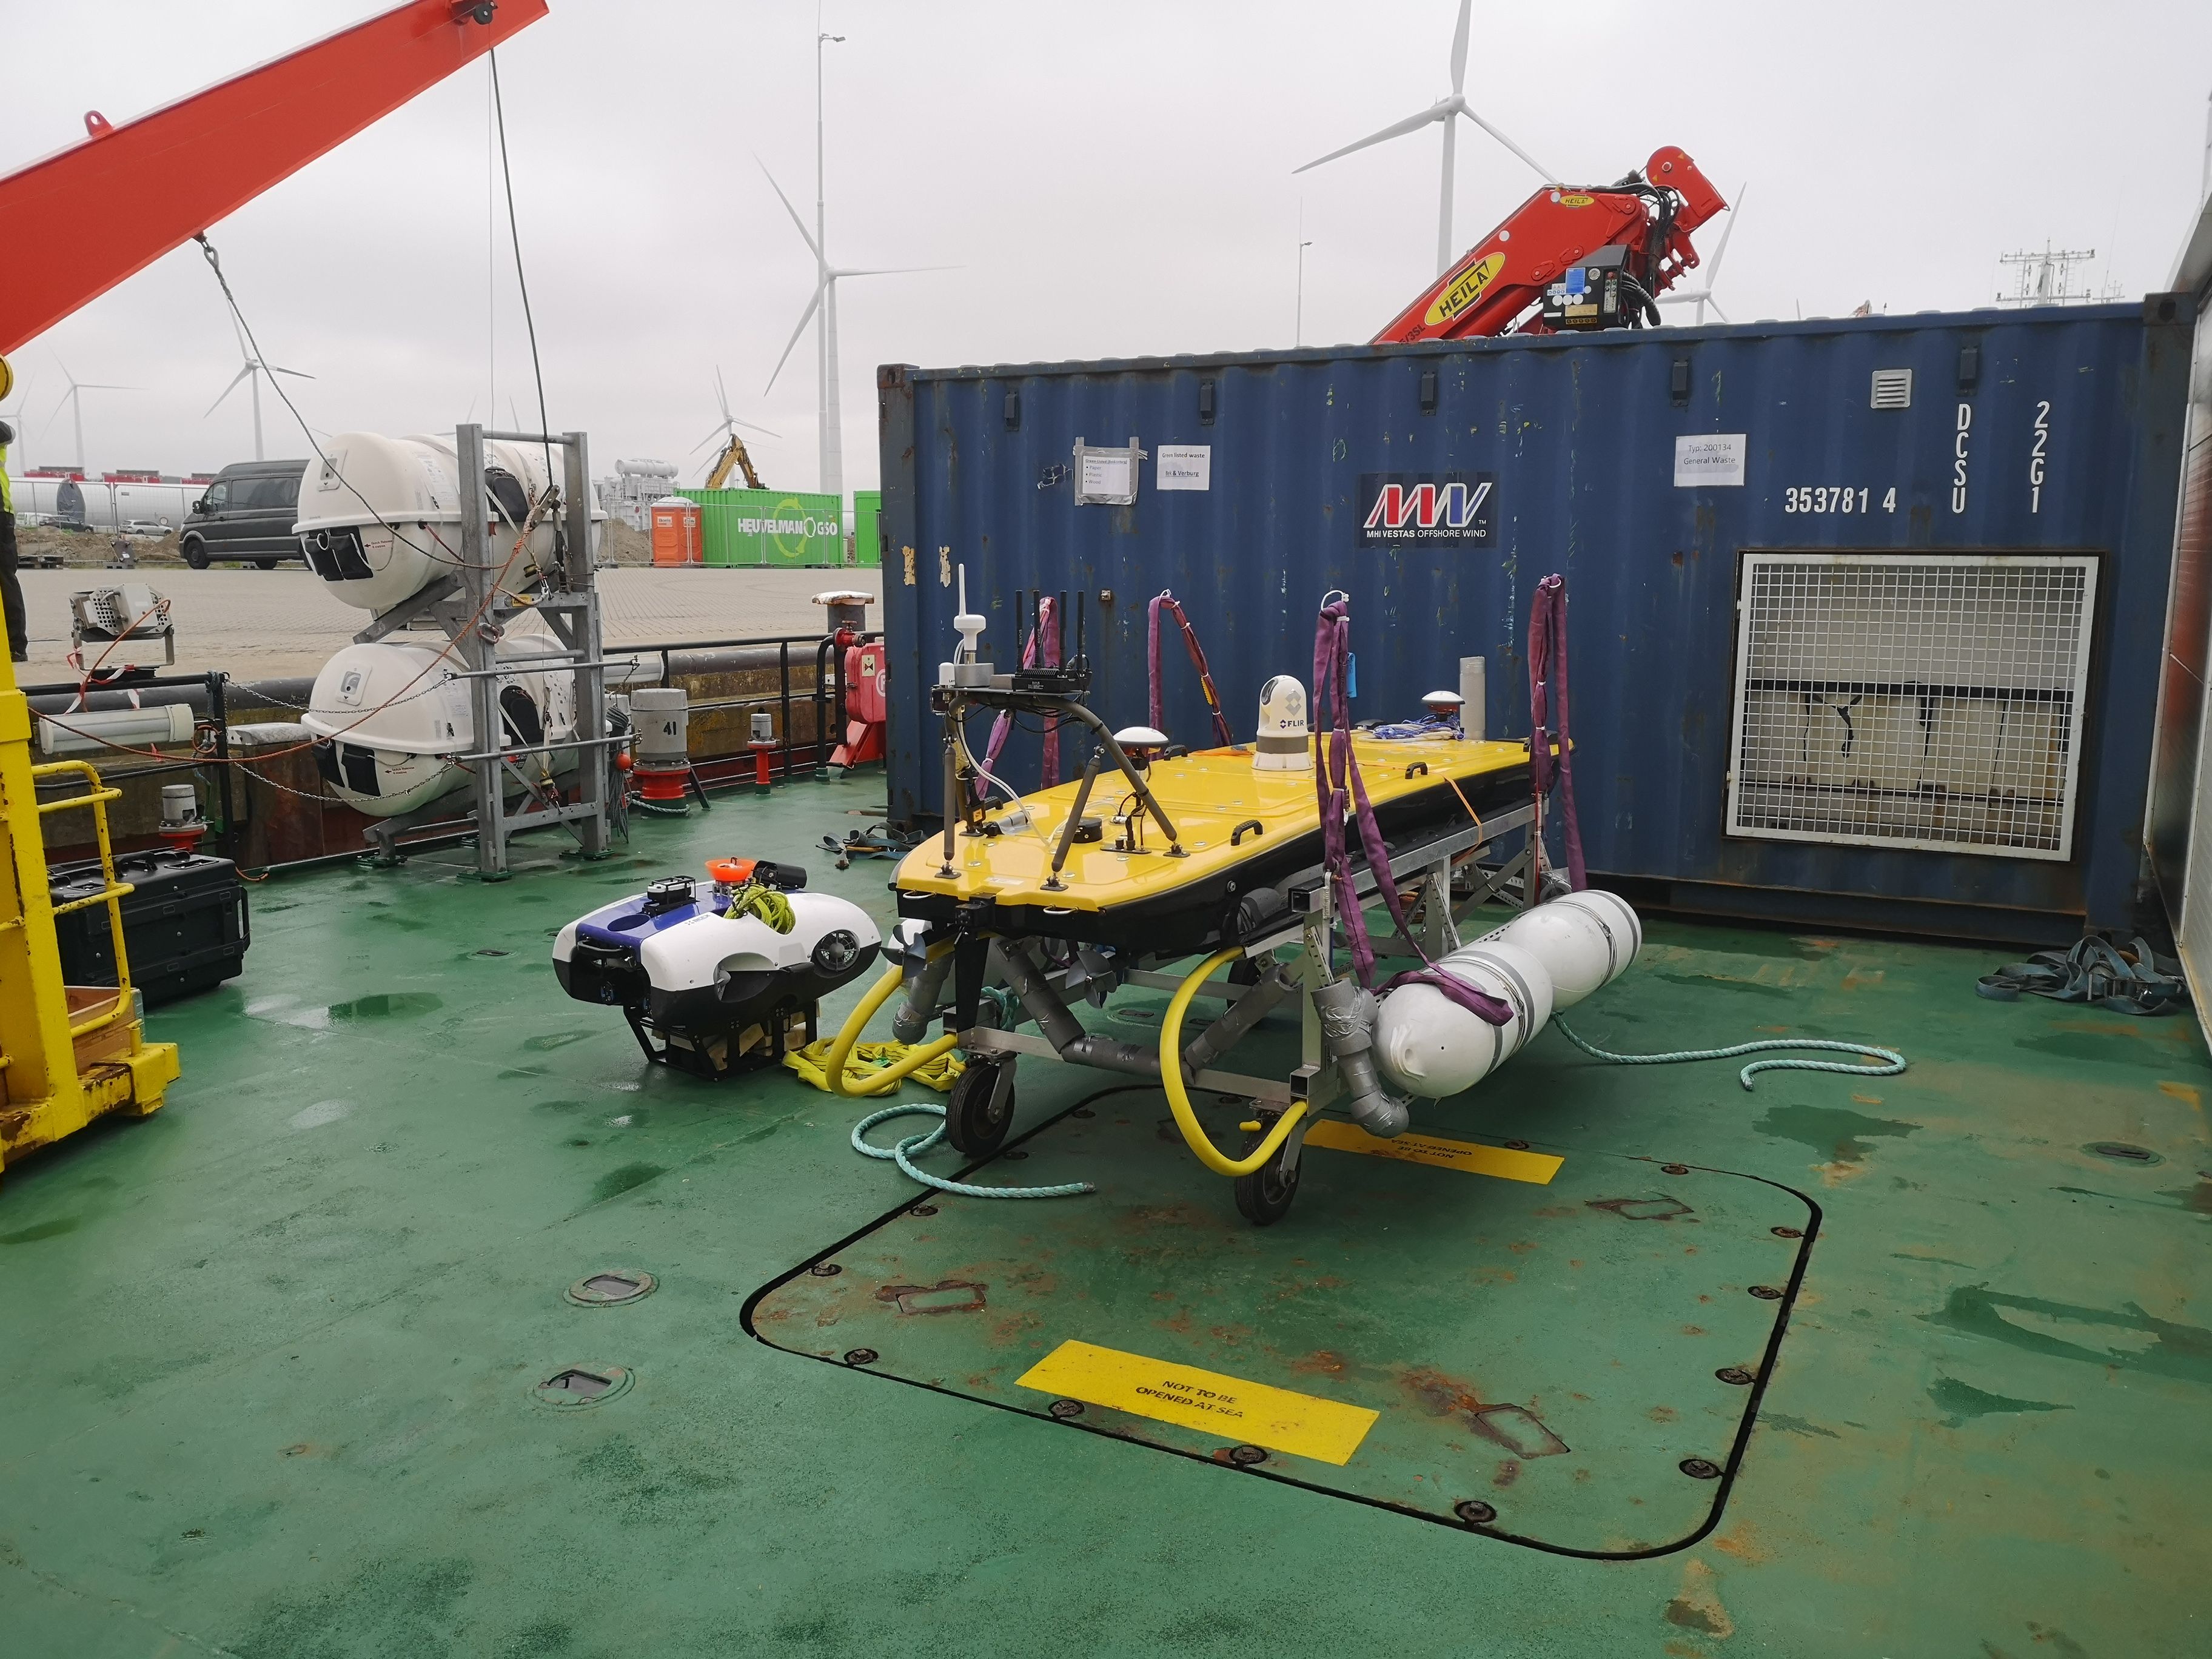 2 Northland Power release 02 Credit Subsea Europe Services GmbH 1